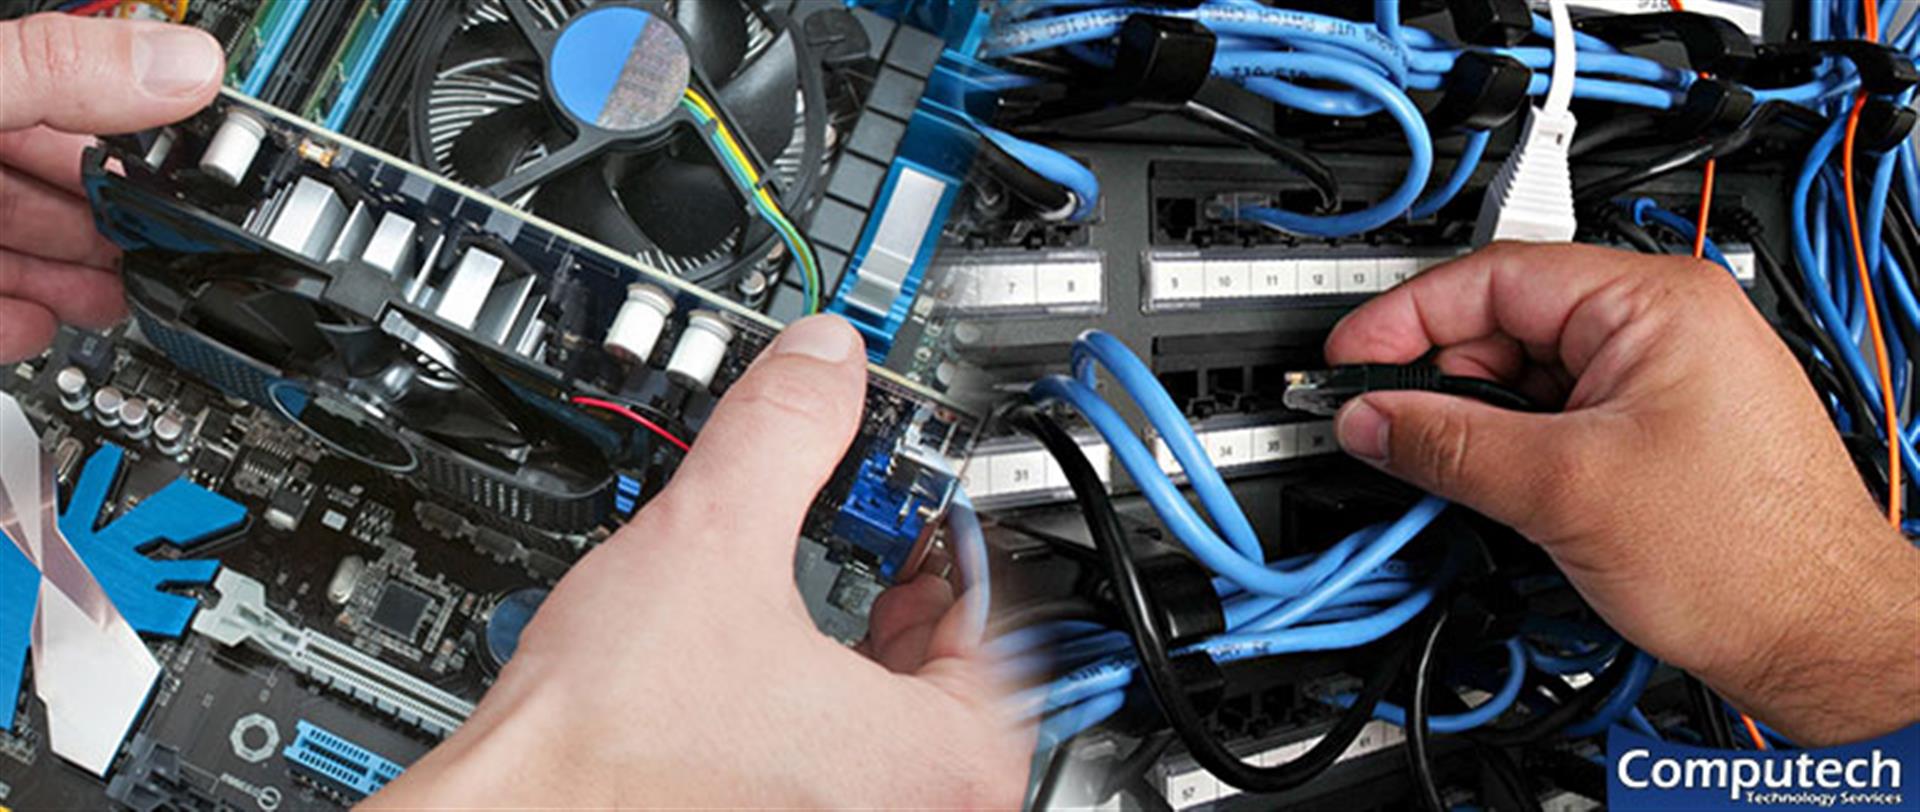 Moulton Alabama Onsite PC & Printer Repairs, Networks, Telecom & Data Low Voltage Cabling Services